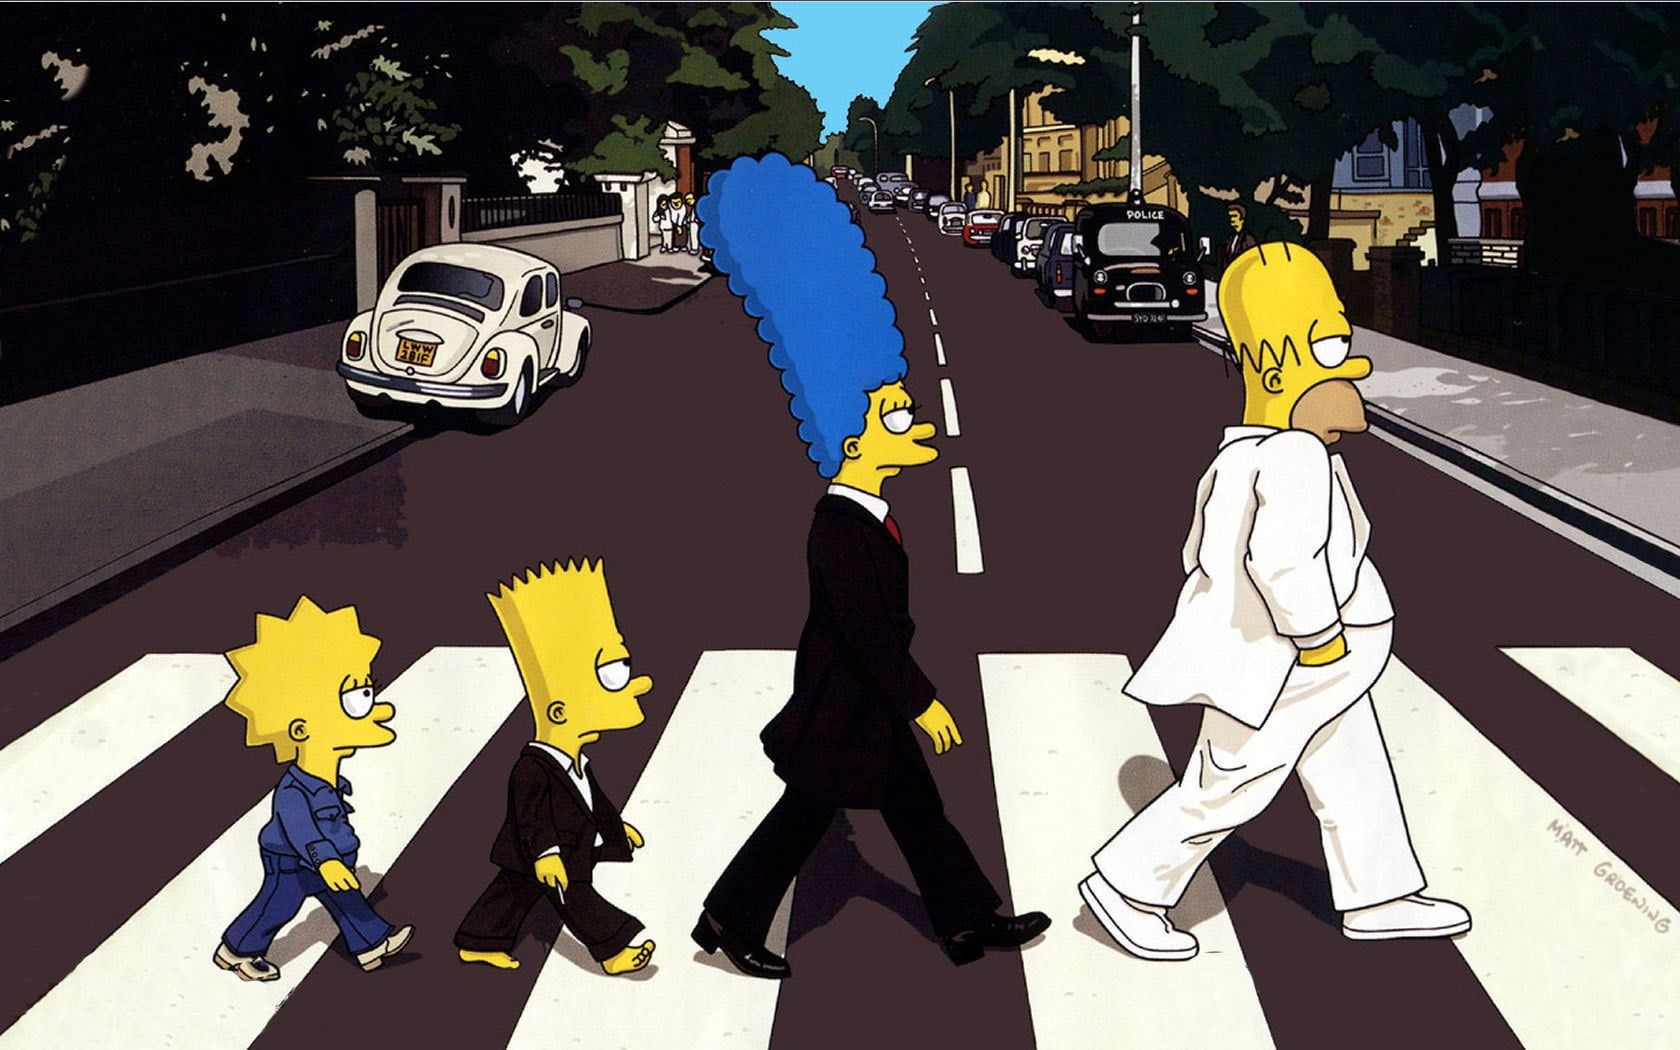 The Simpsons crossing a zebra crossing in a scene similar to the Beatles' album cover for 'Abbey Road'. - The Simpsons